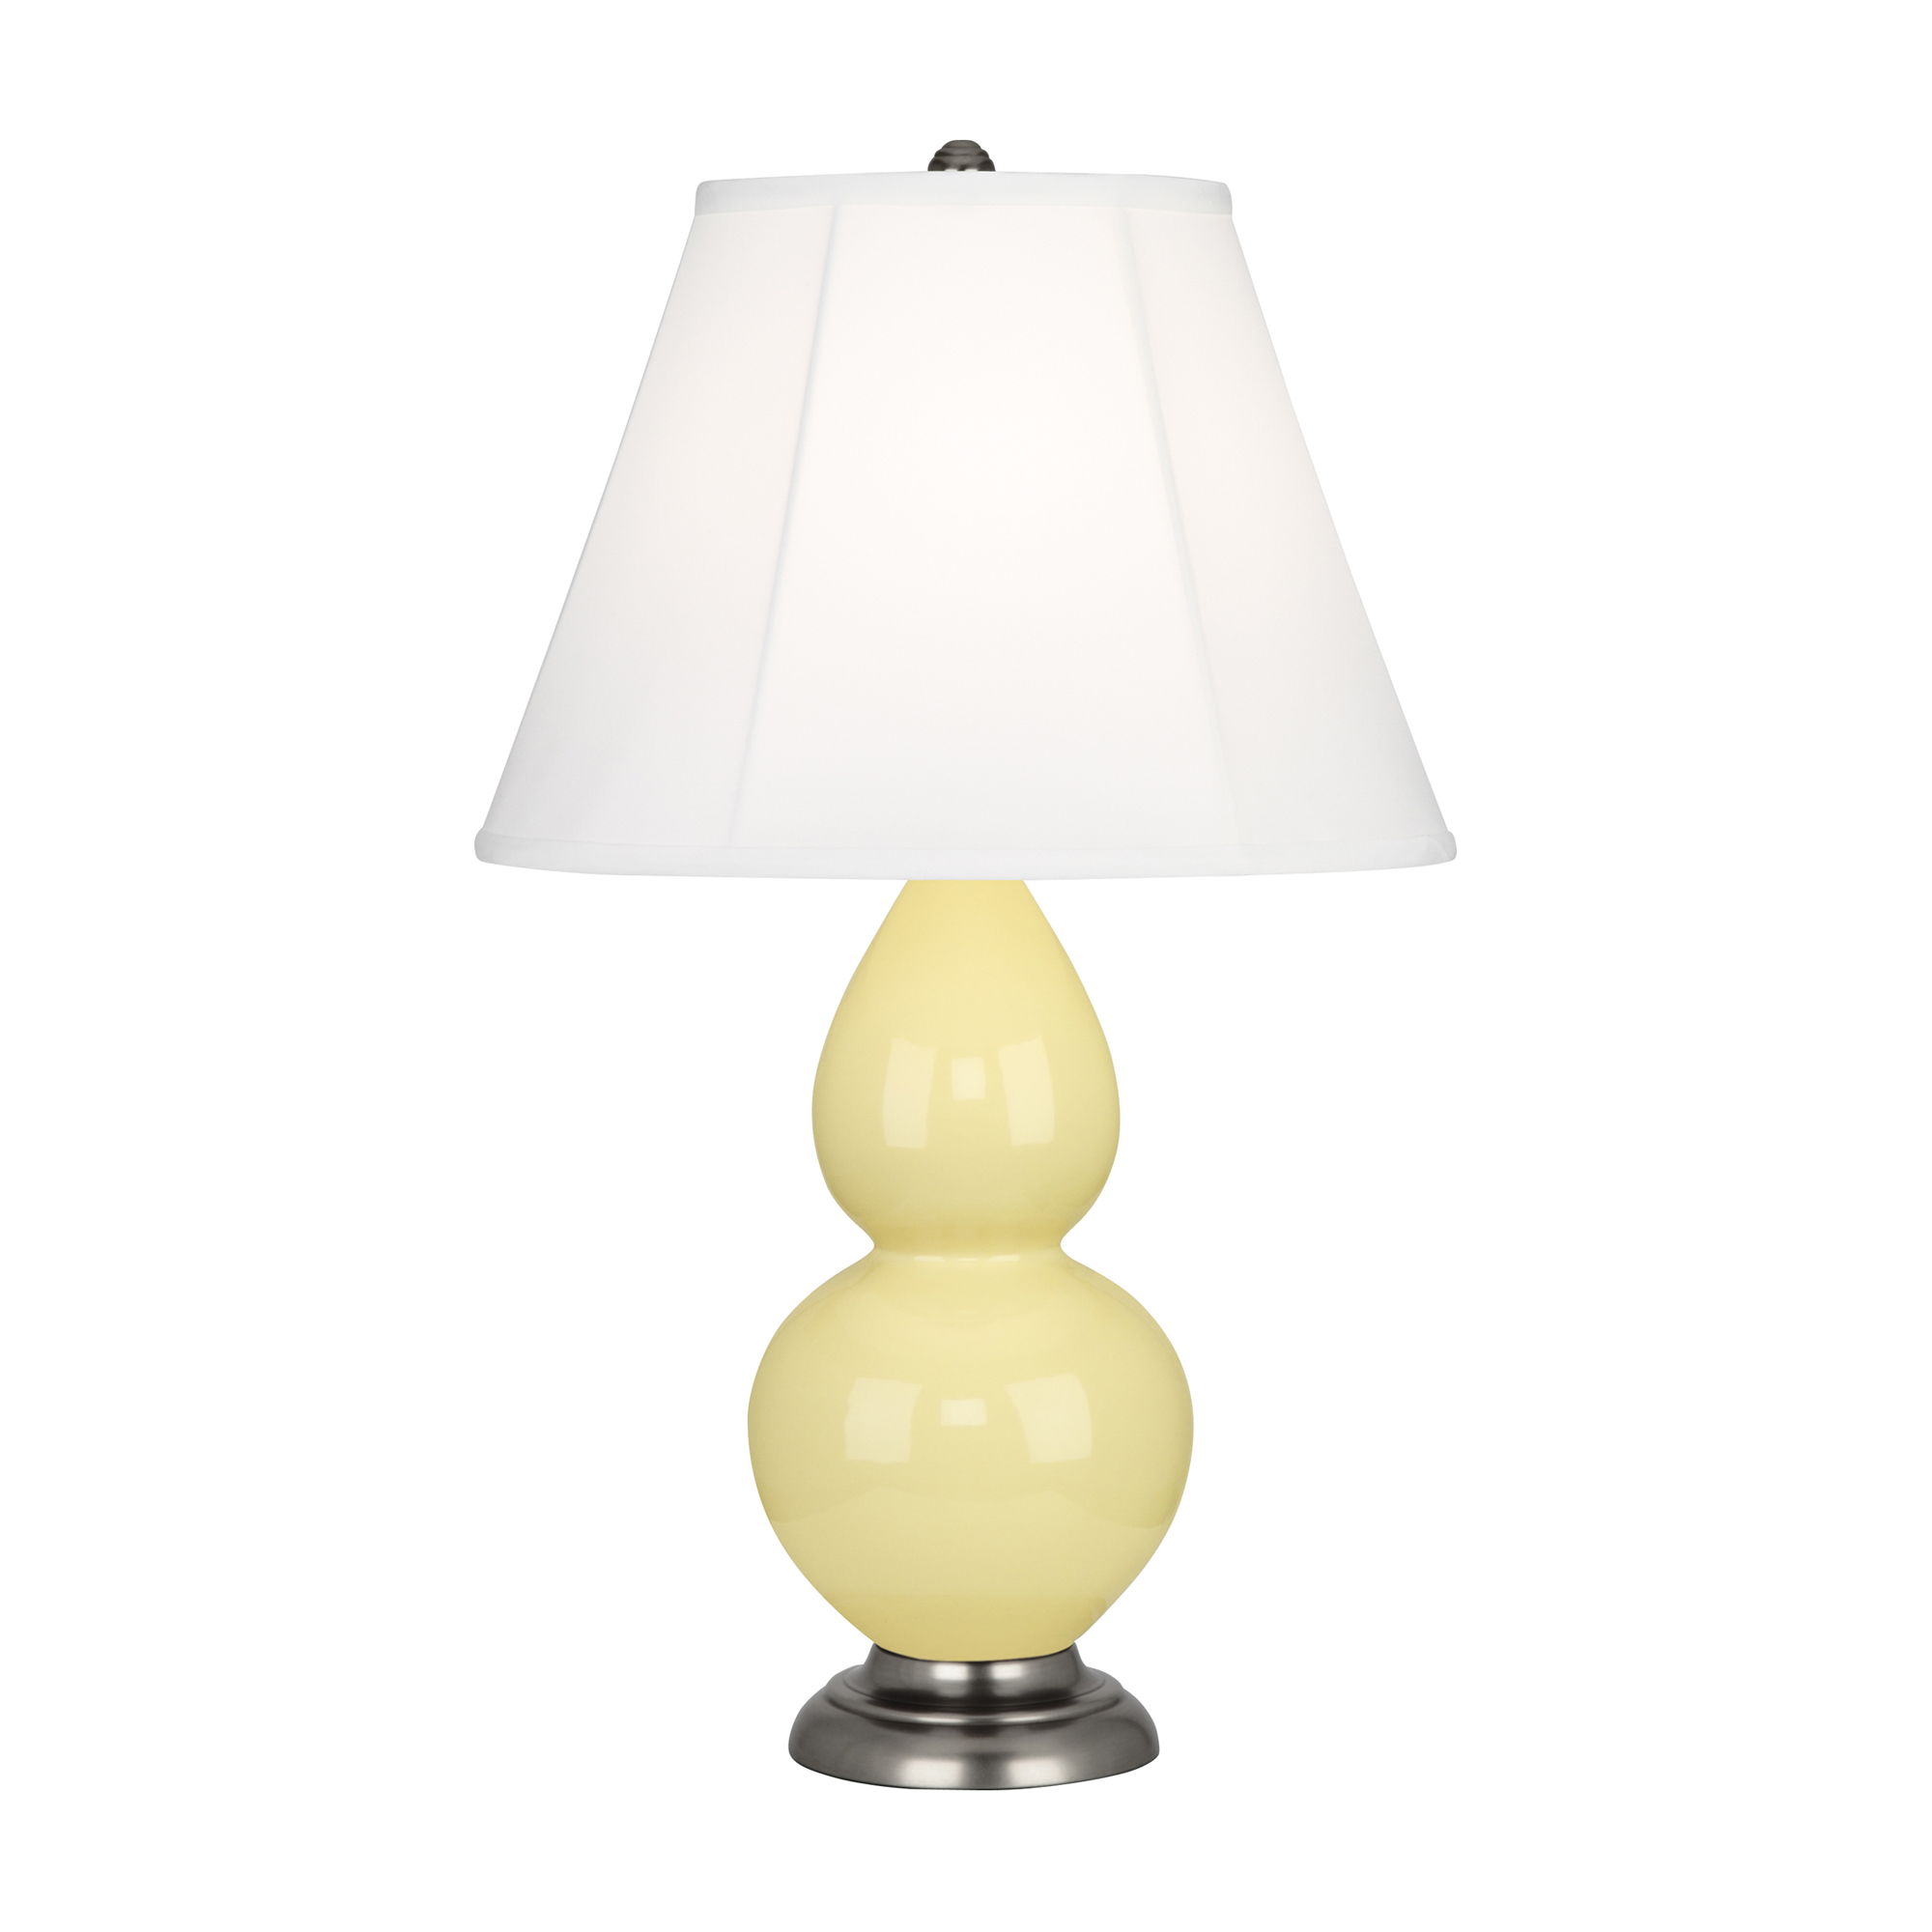 Small Double Gourd Accent Lamp Style #1616